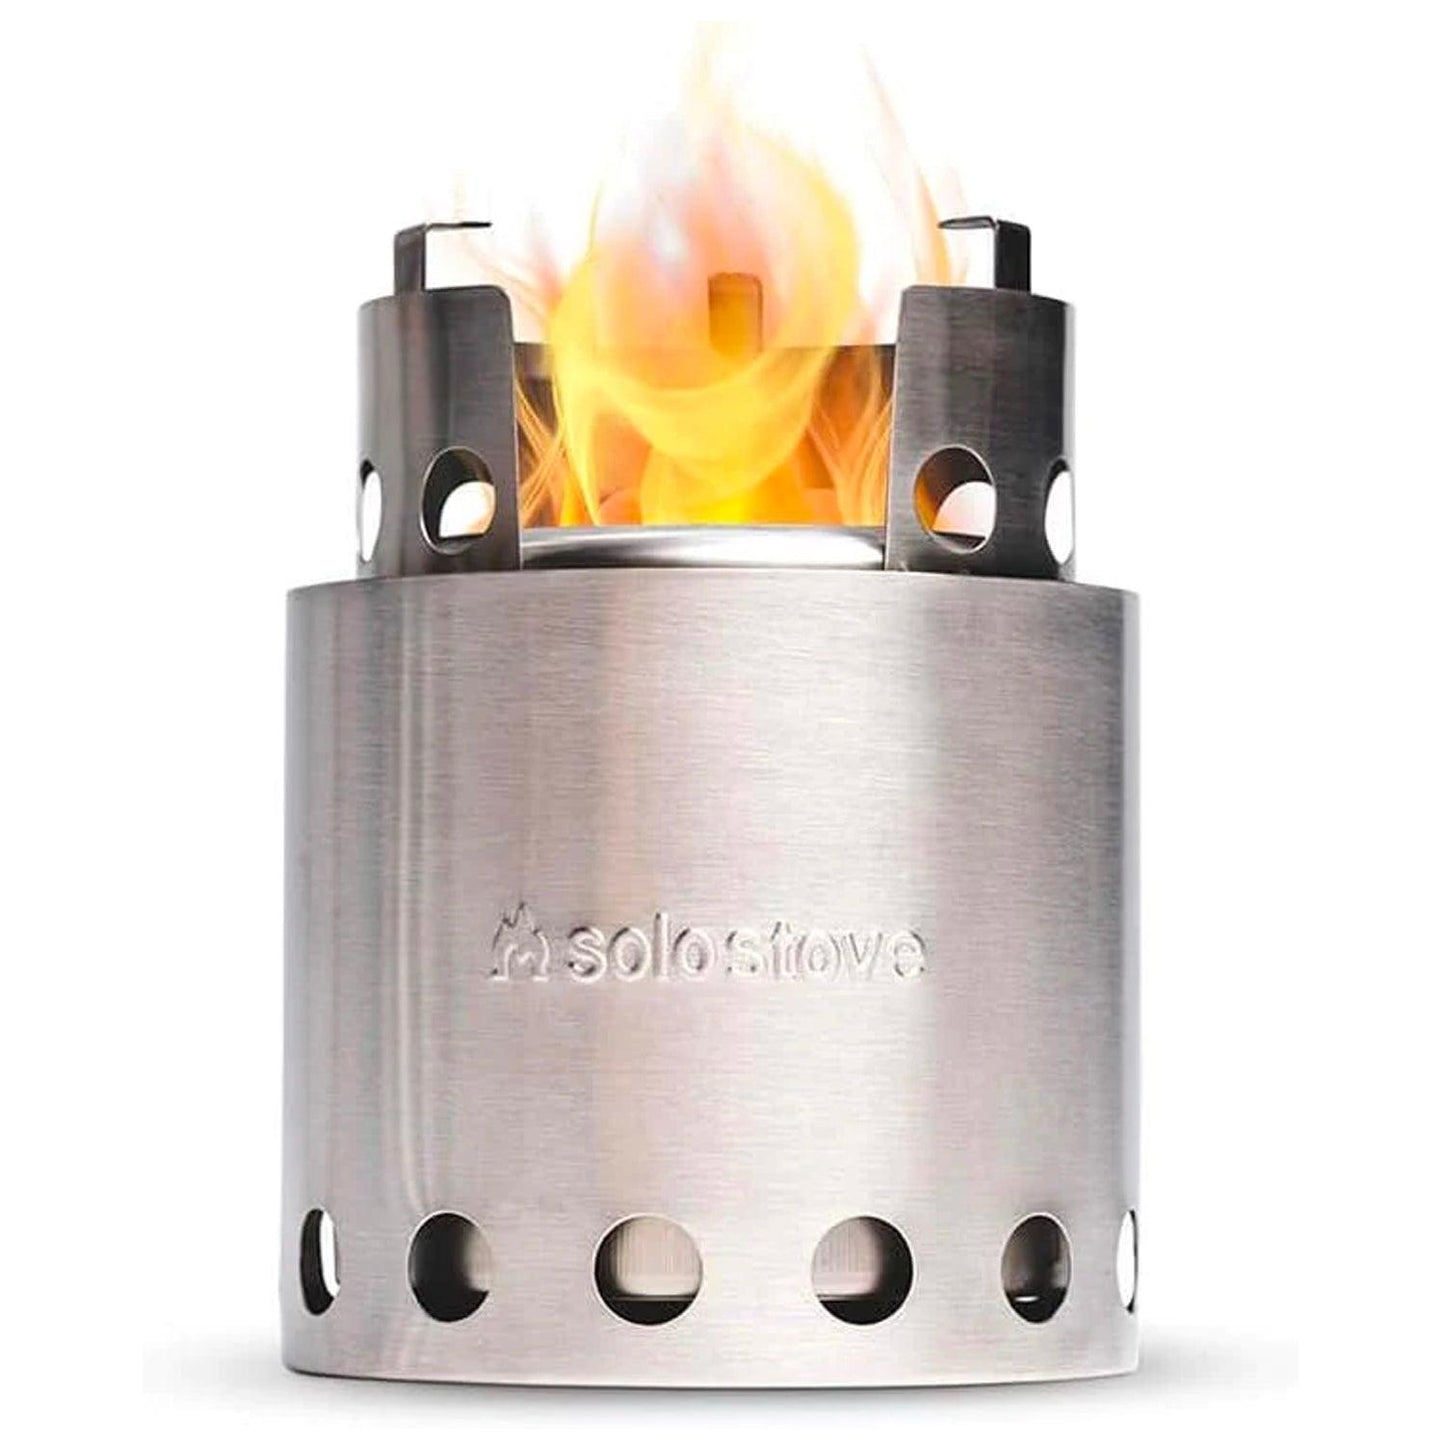 Solo Stove Lite/Titan/Campfire Camping Stove Portable Stove for Backpacking Outdoor Cooking Great Stainless Steel Camping Backpacking Stove Compact Wood Stove Design-No Batteries or Liquid Fuel Canisters Needed